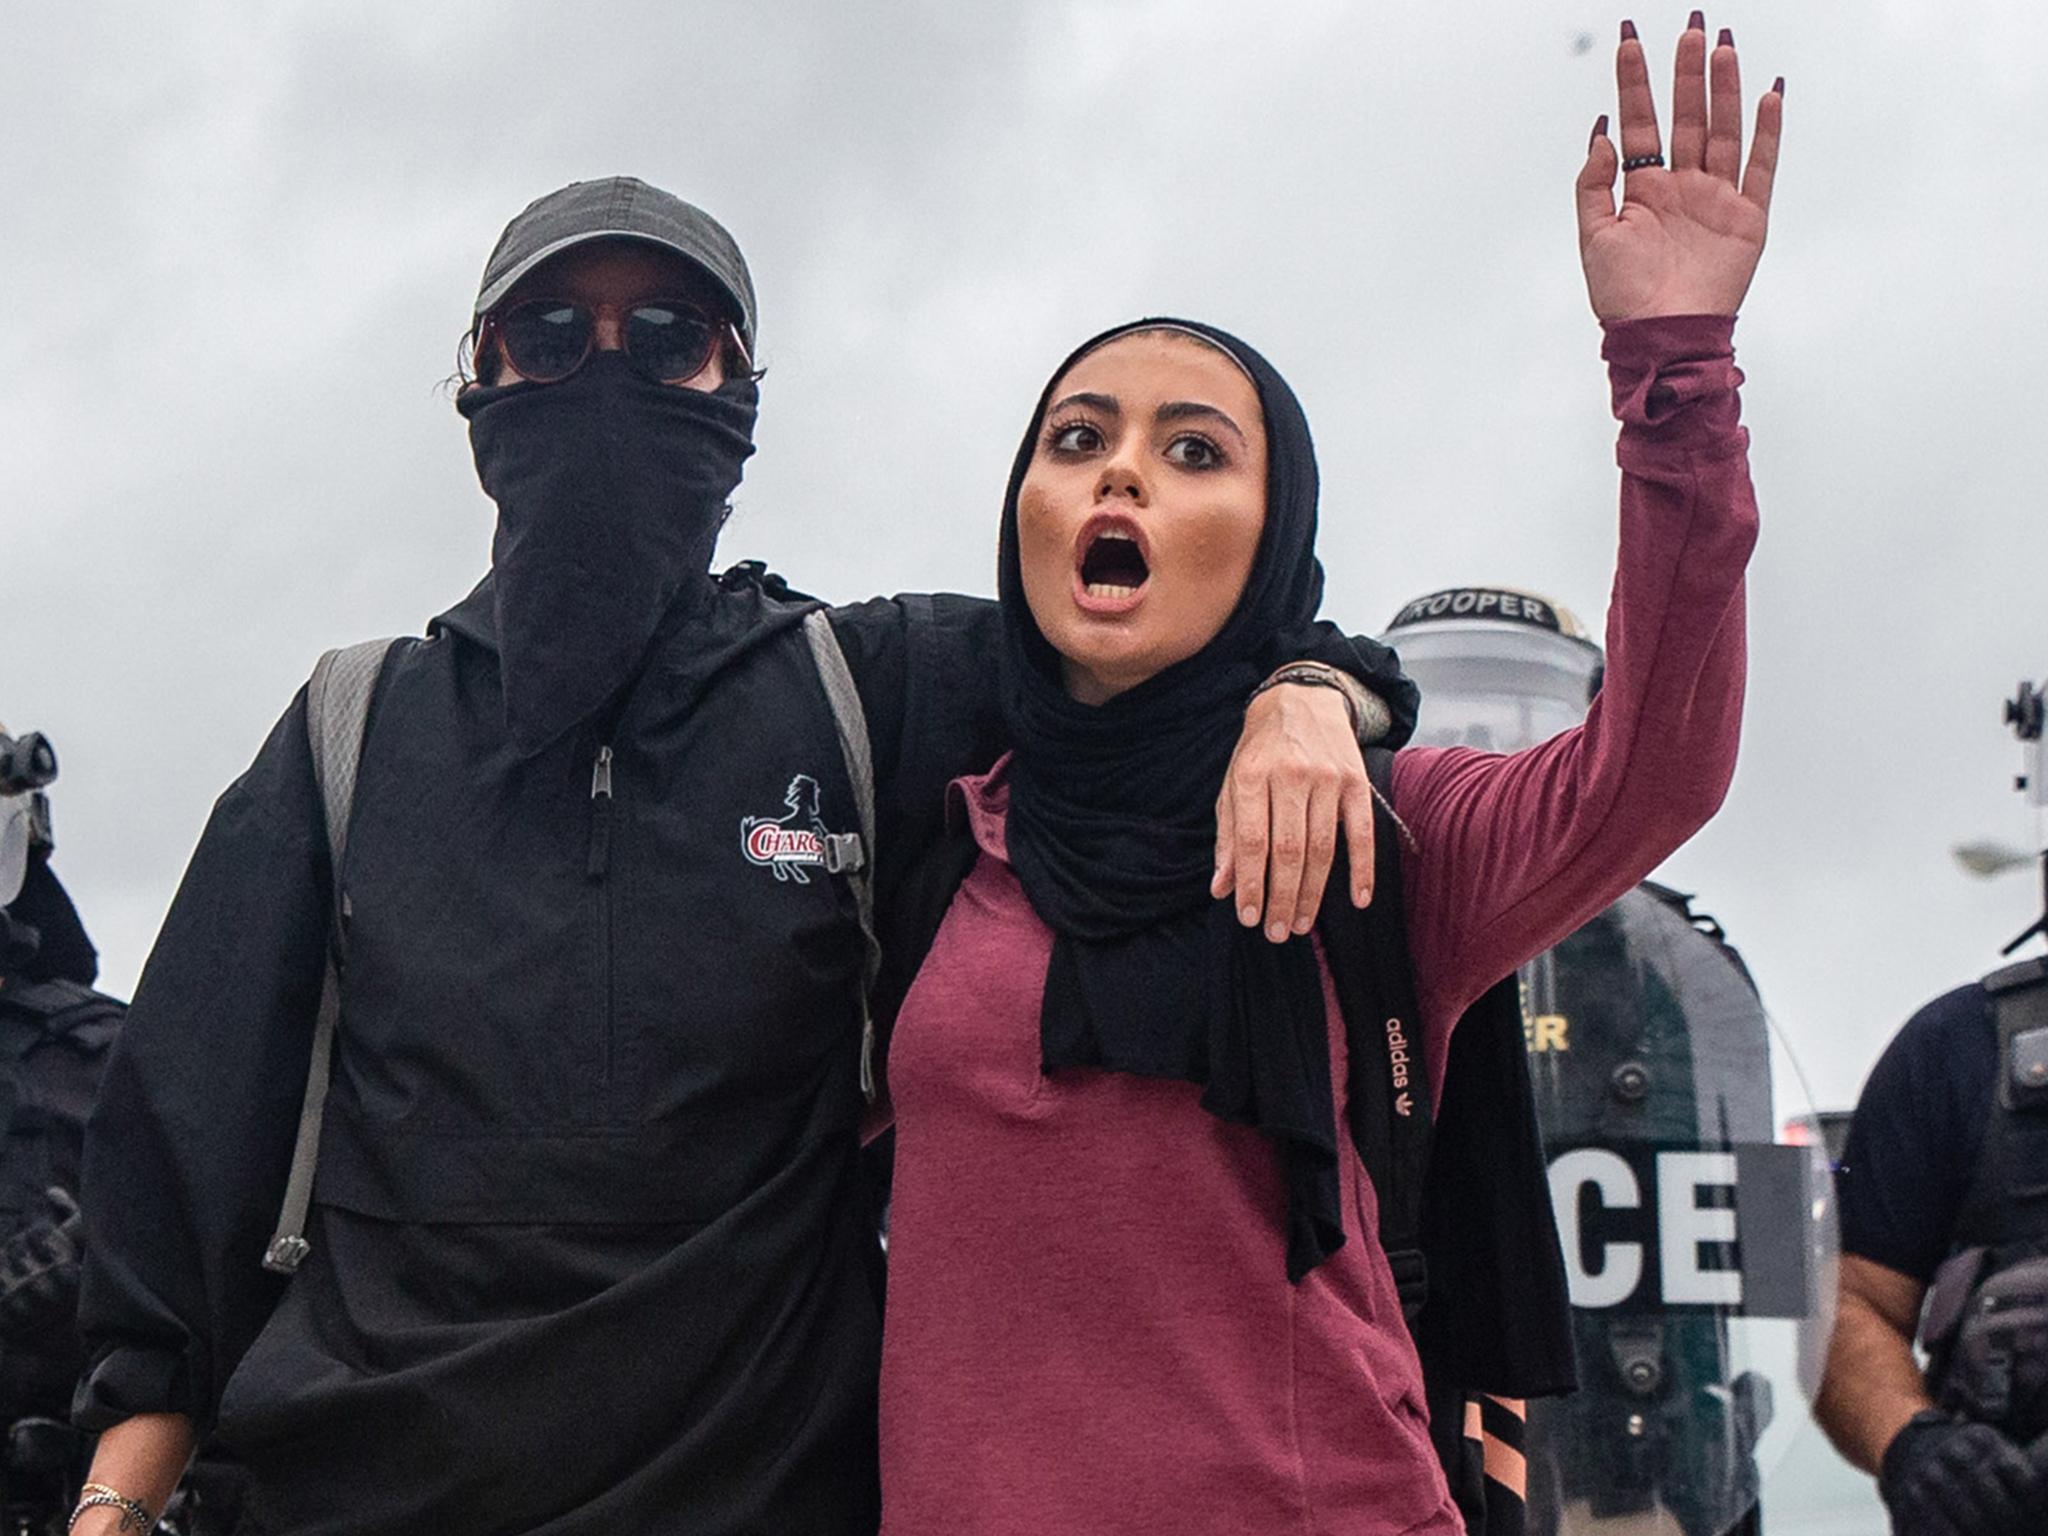 Alaa Massri, an 18-year-old who was arrested at a peaceful demonstration against systemic racism in Miami, has said her civil rights were infringed